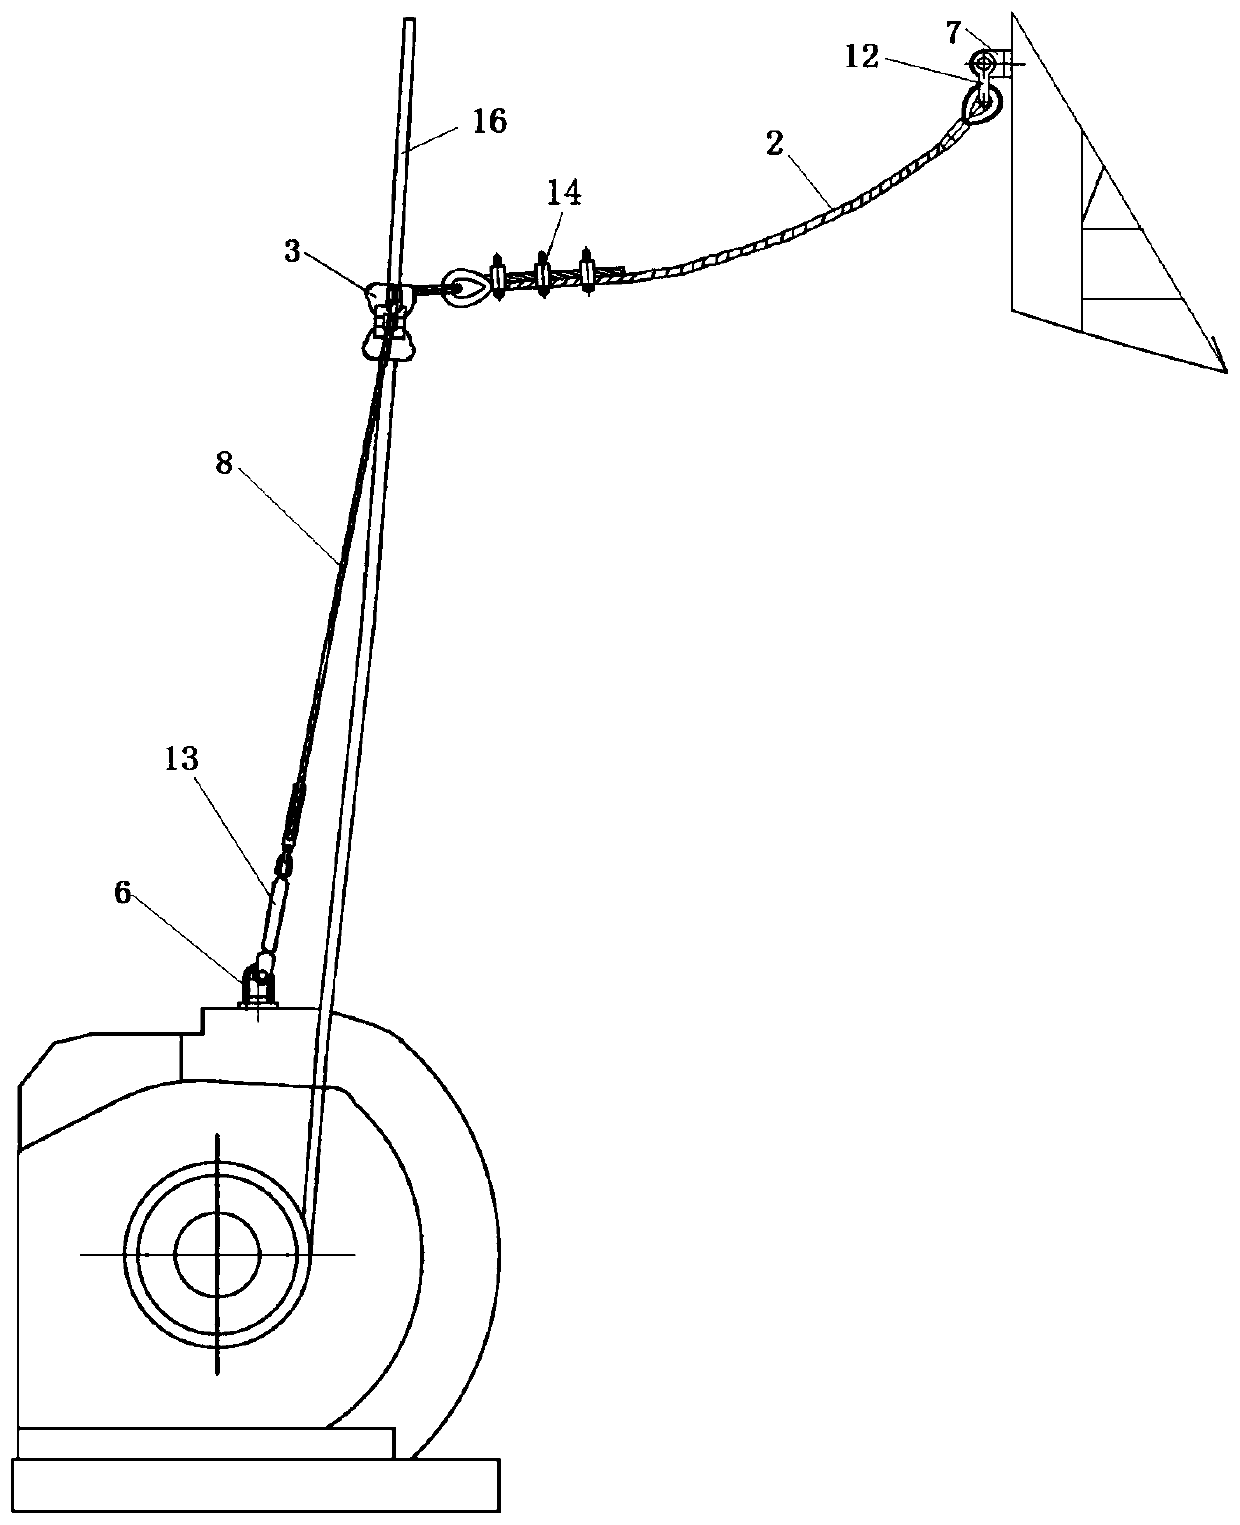 A rope-laying device for a follow-up winch